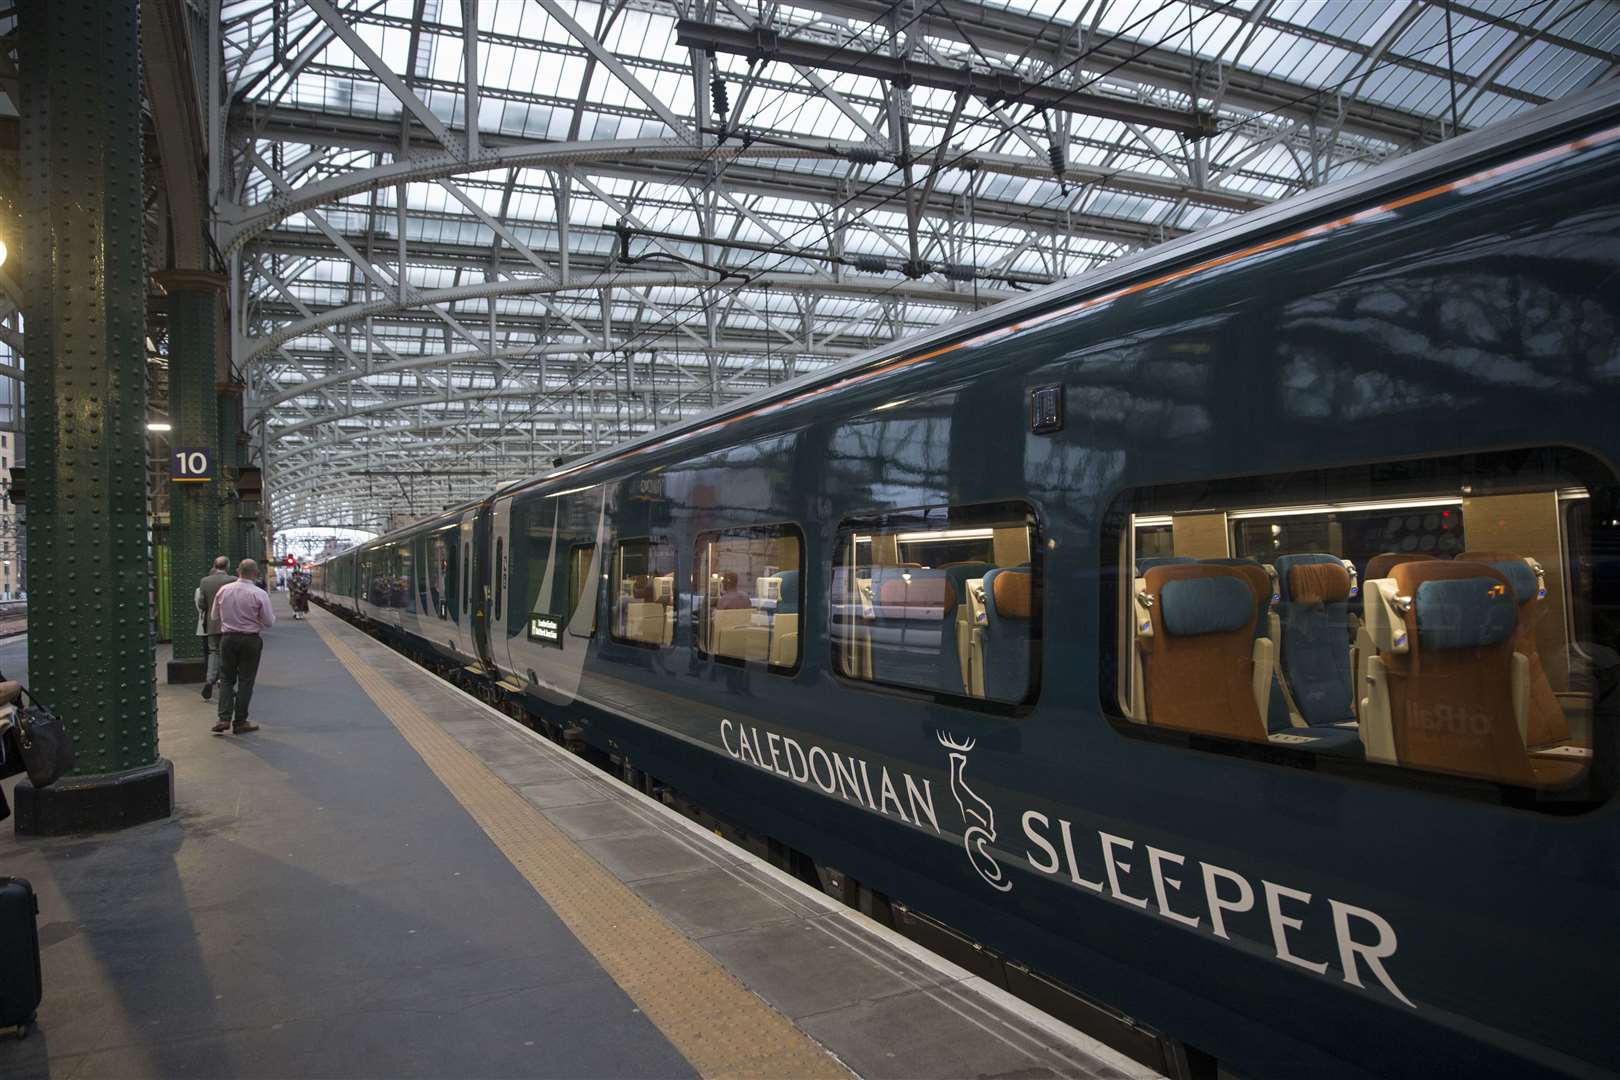 All Caledonian Sleeper services are cancelled this Sunday and Monday.